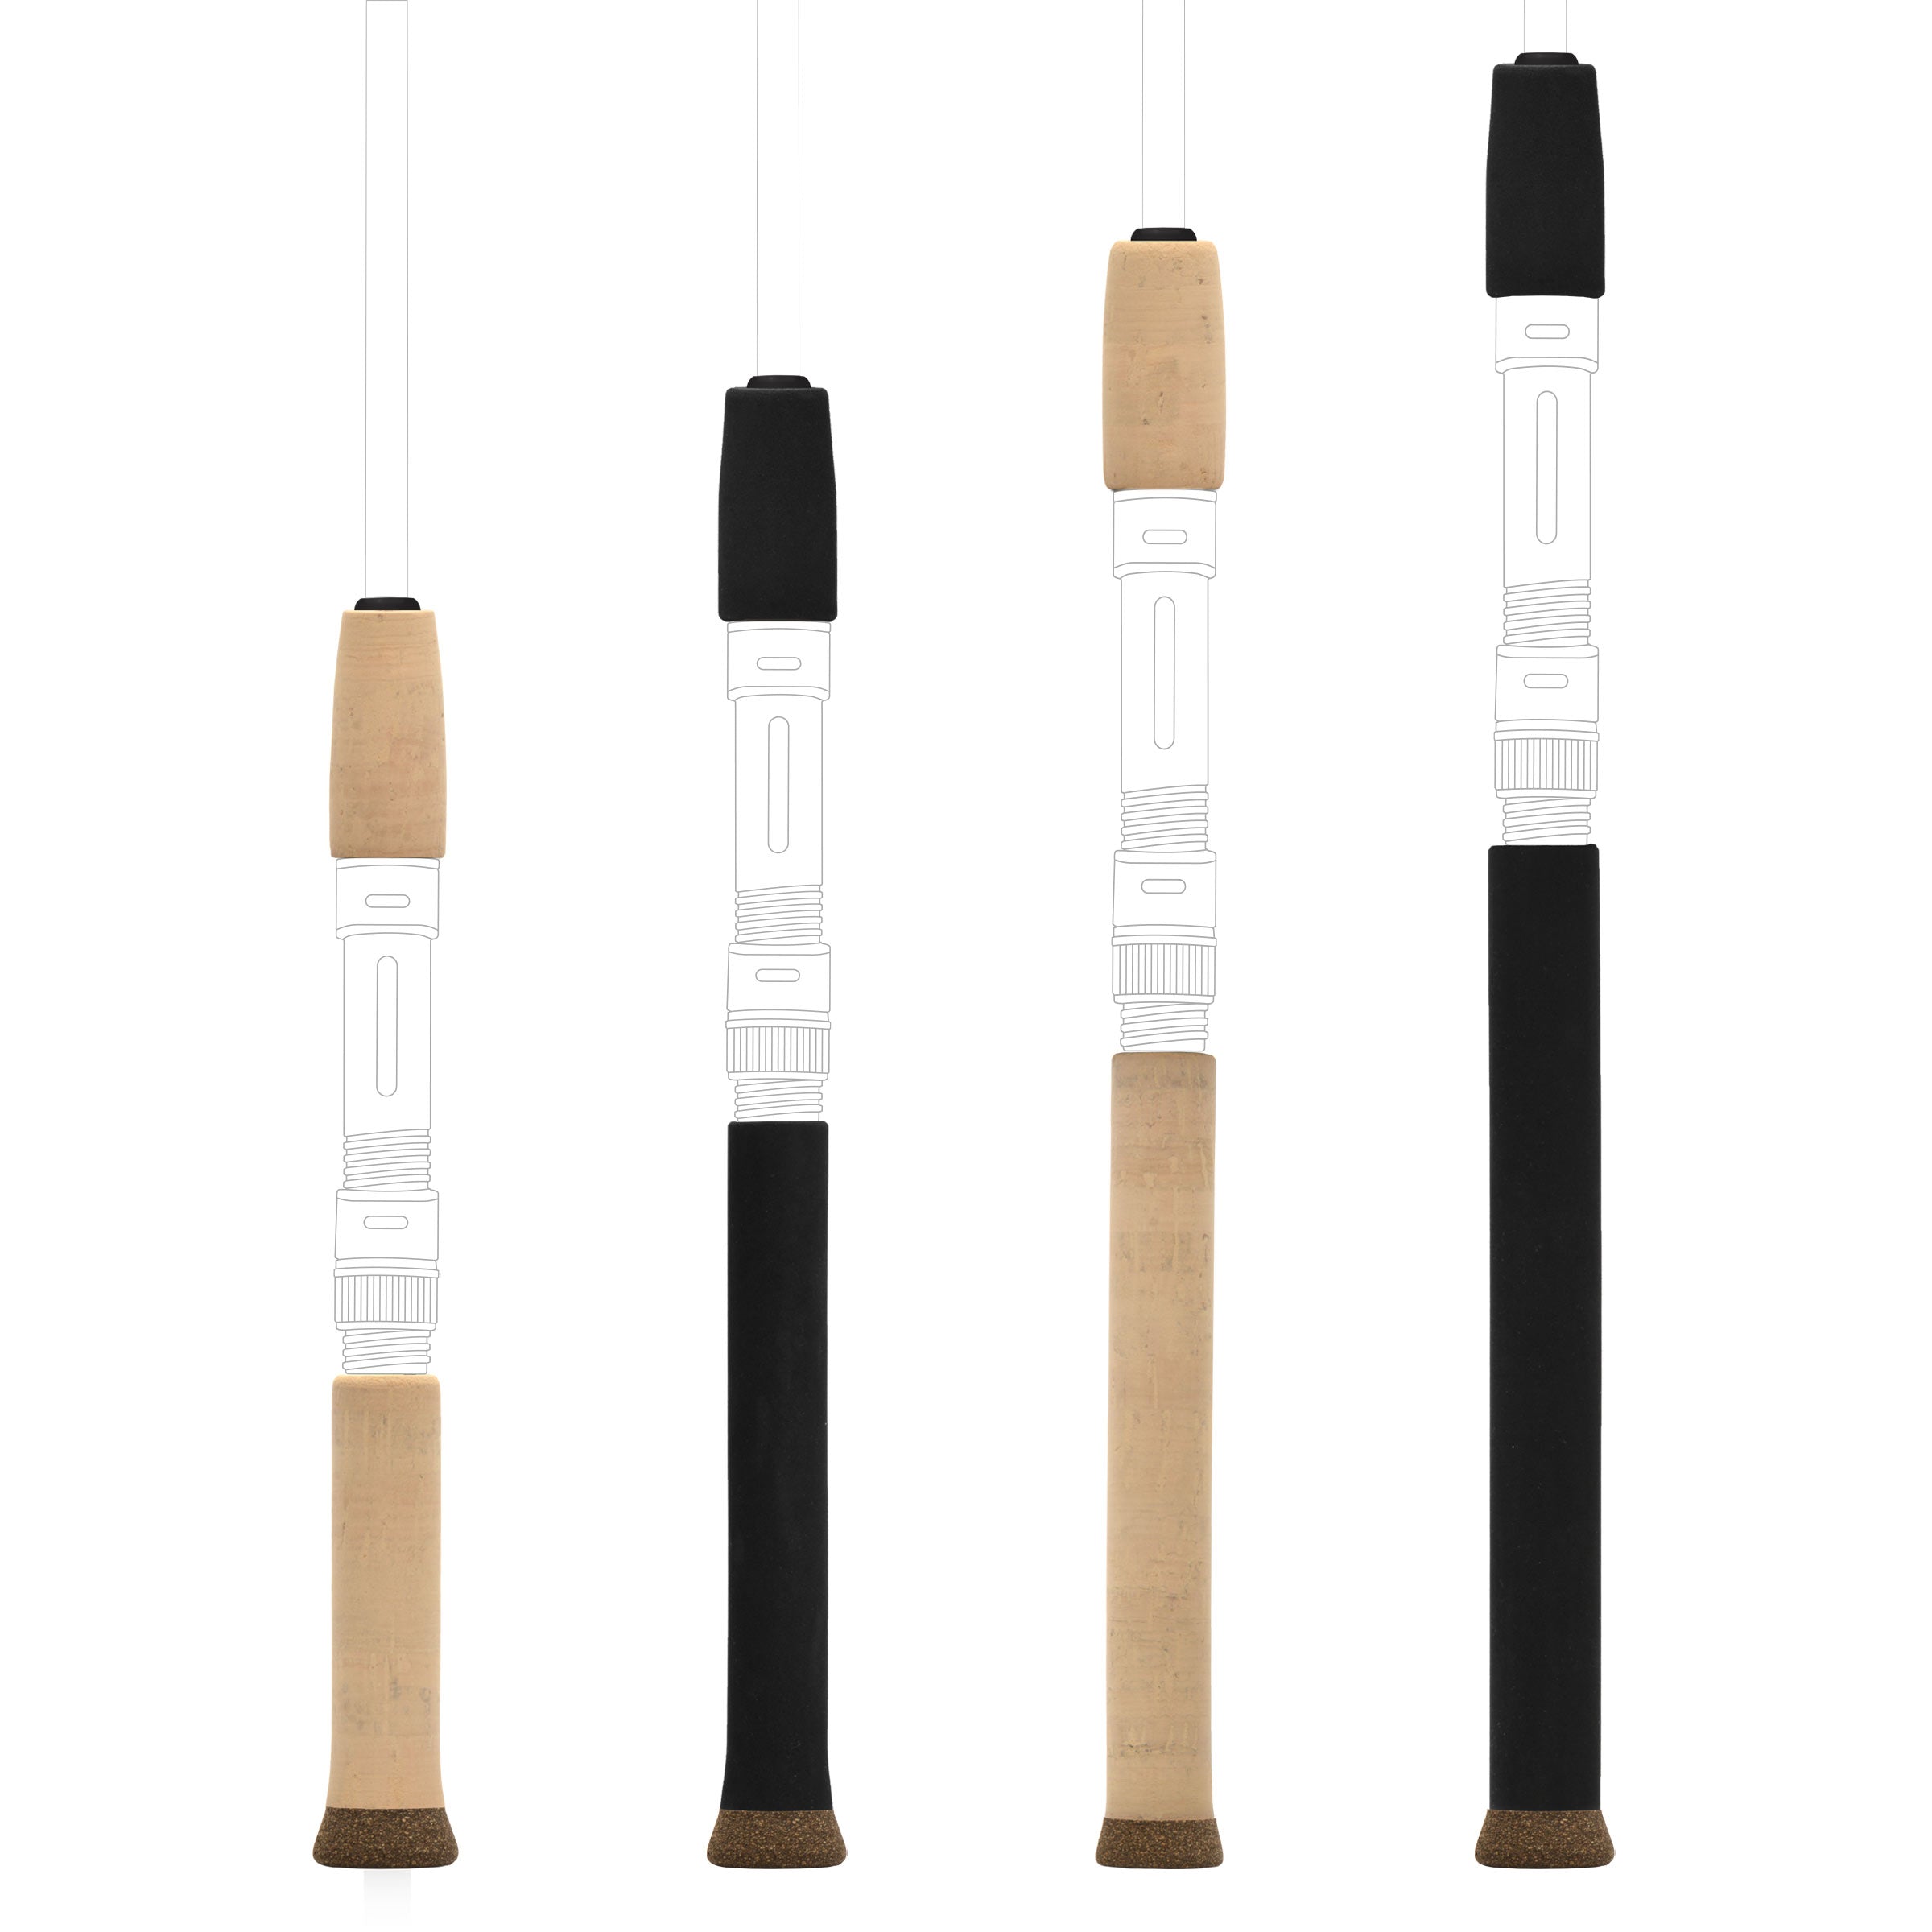 CRB 5'6 Light Color Series Rod Blank - IS561L